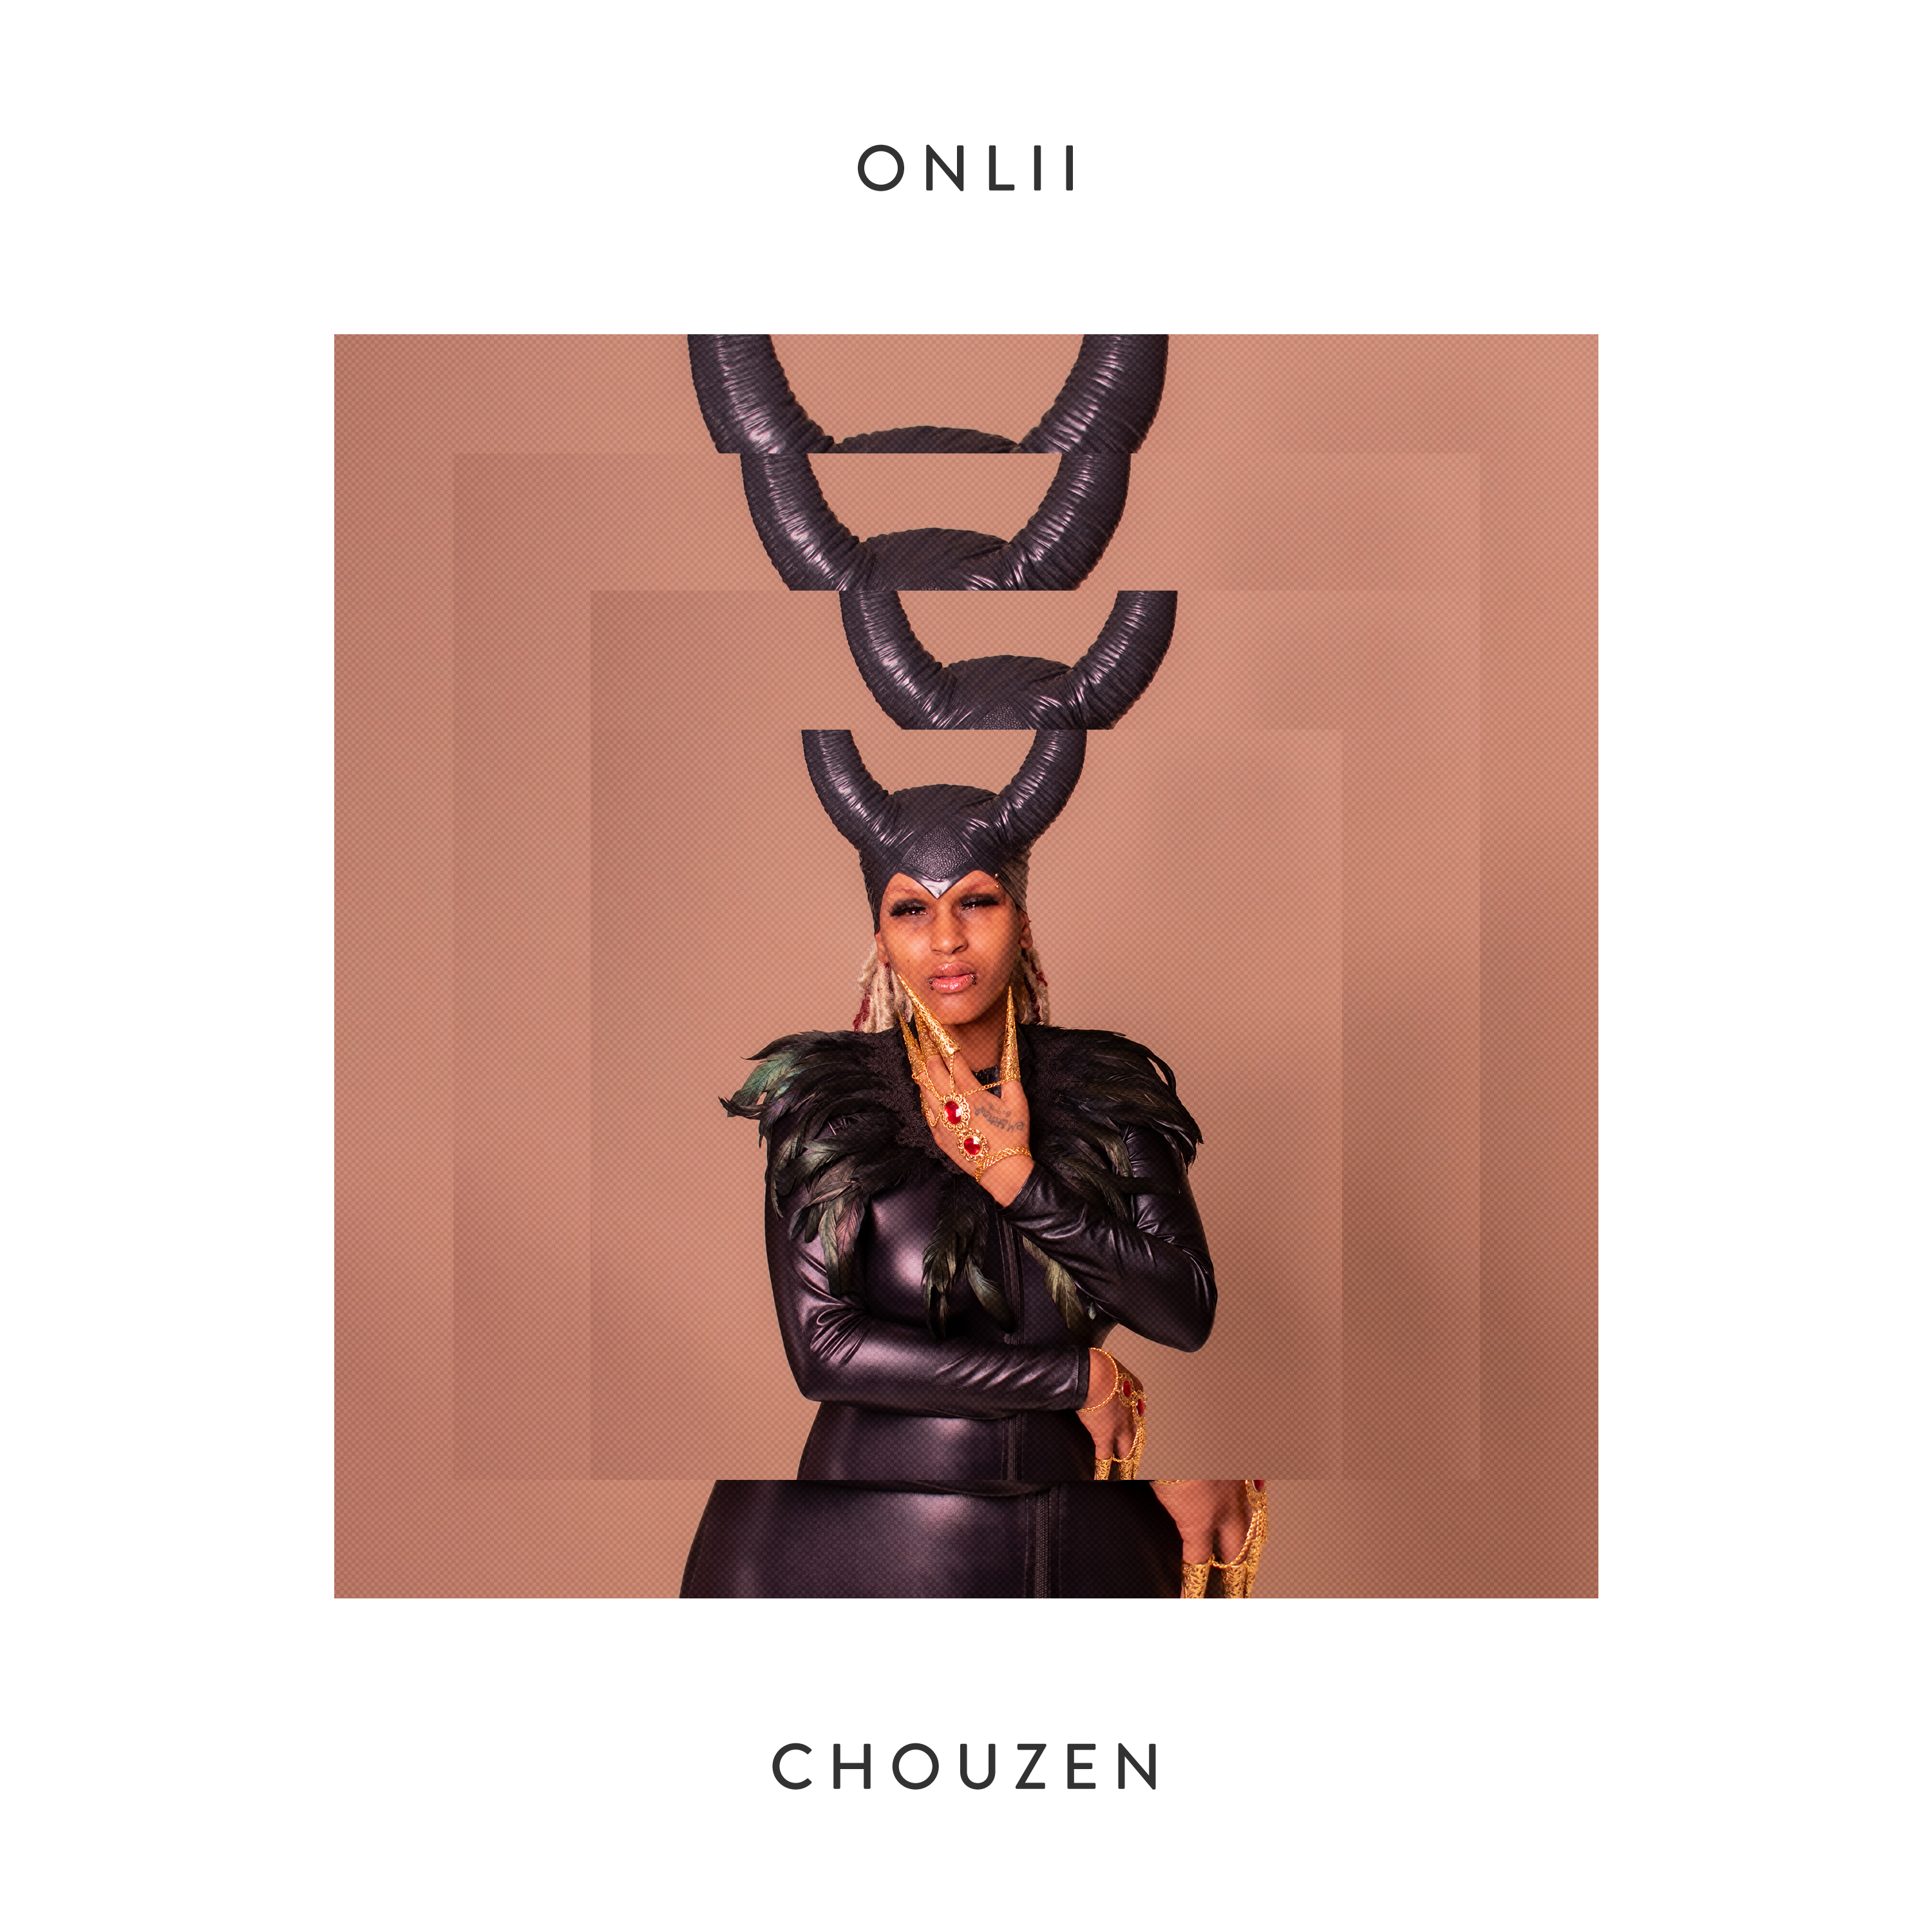 Tapping Into Her Own Life Story with Radiant Hip Hop Tunes: US-based Rapper Onlii Debuts New Single "Chouzen"